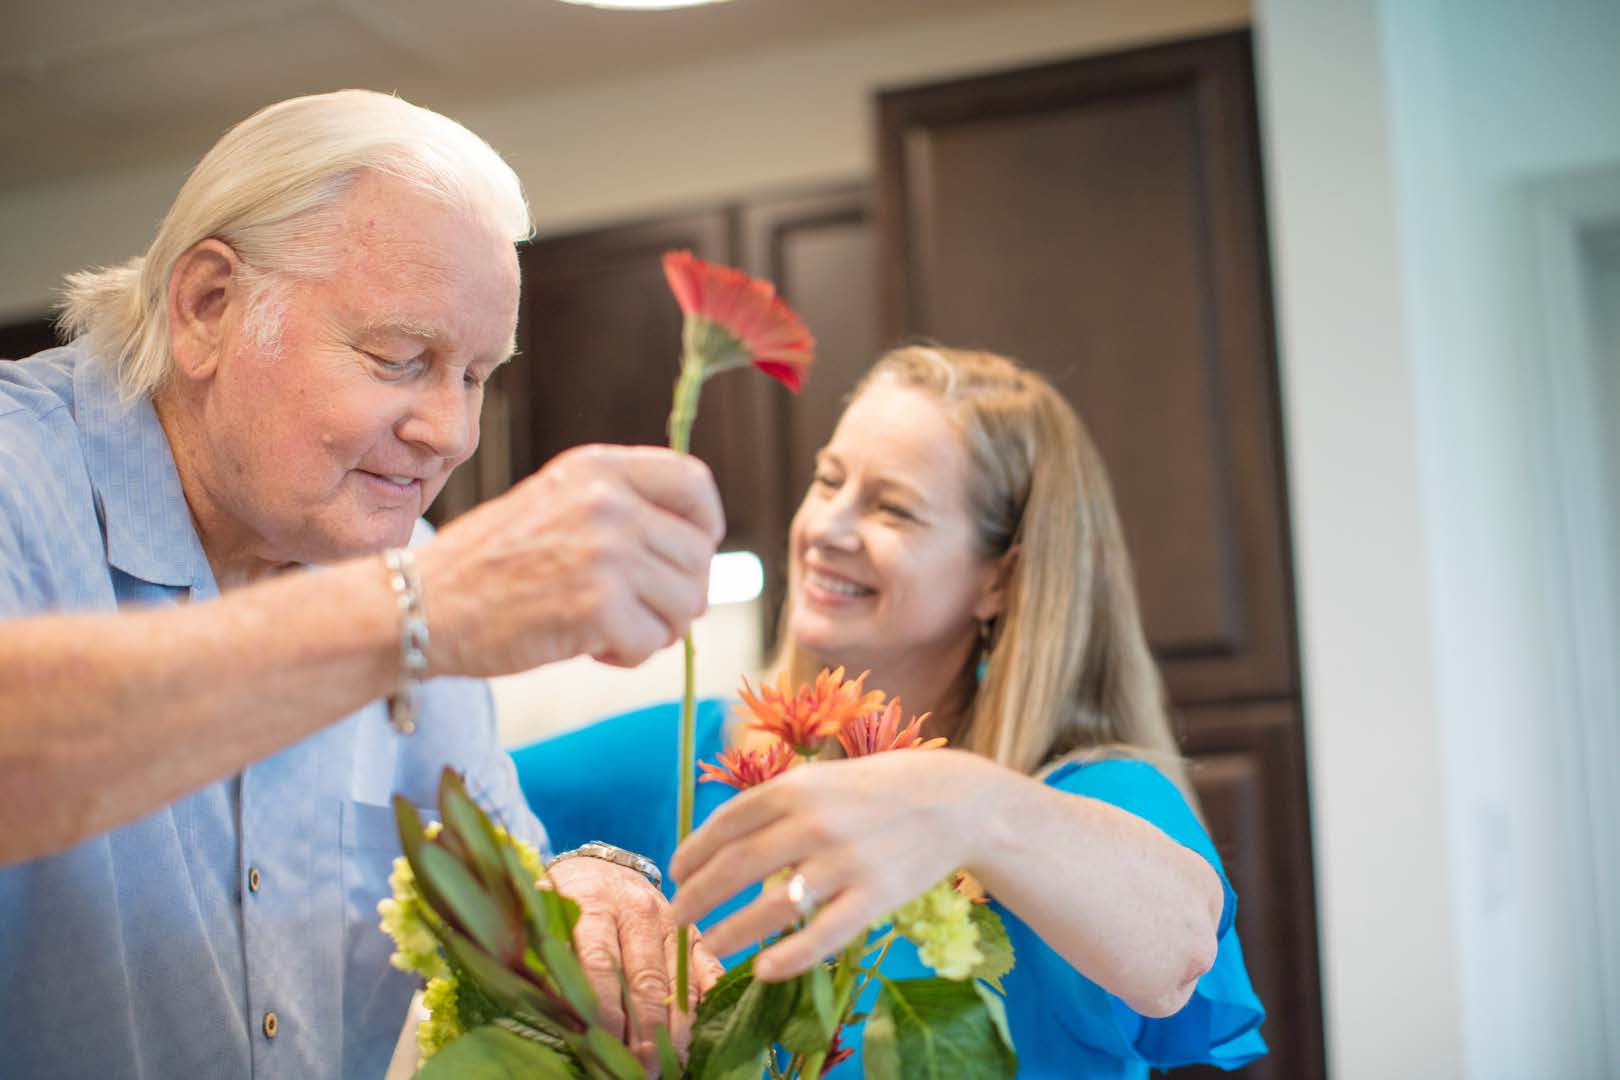 Senior man in kitchen area with adult child arranging a bouquet of red flowers